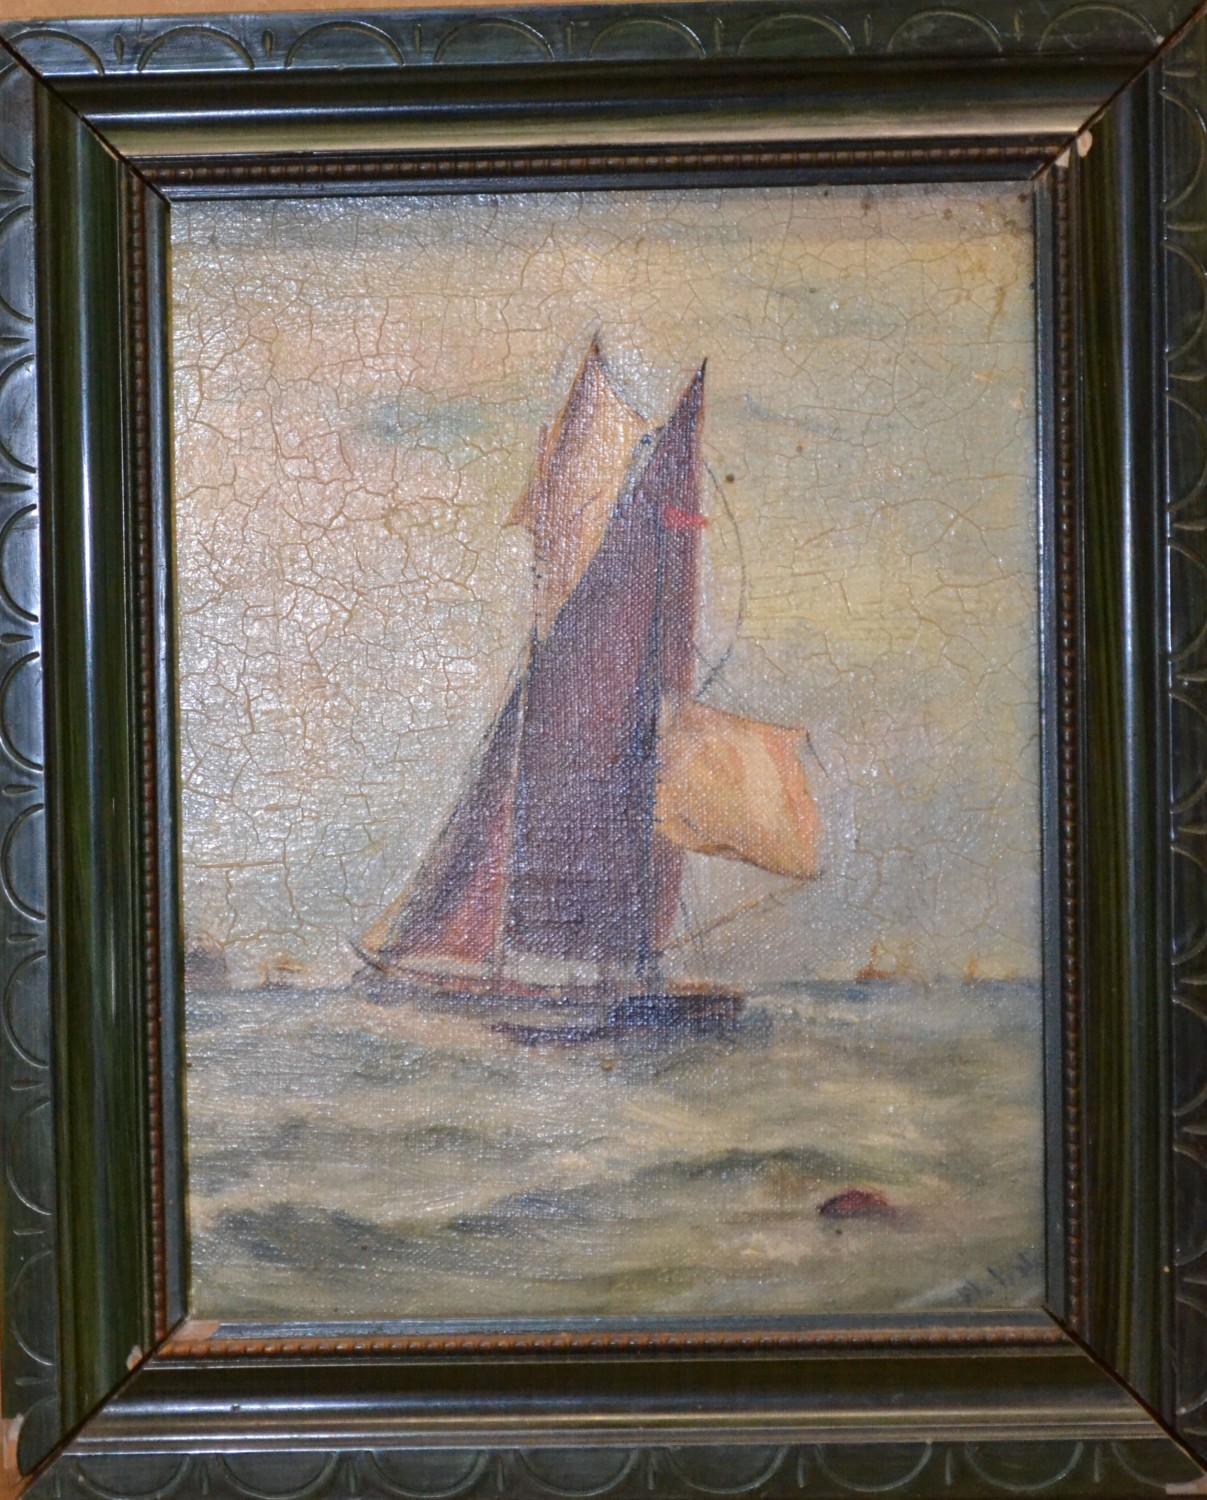 M. Pate?, Marine Oil on Canvas depicting sailing boat at full sail, indistinctly signed in green